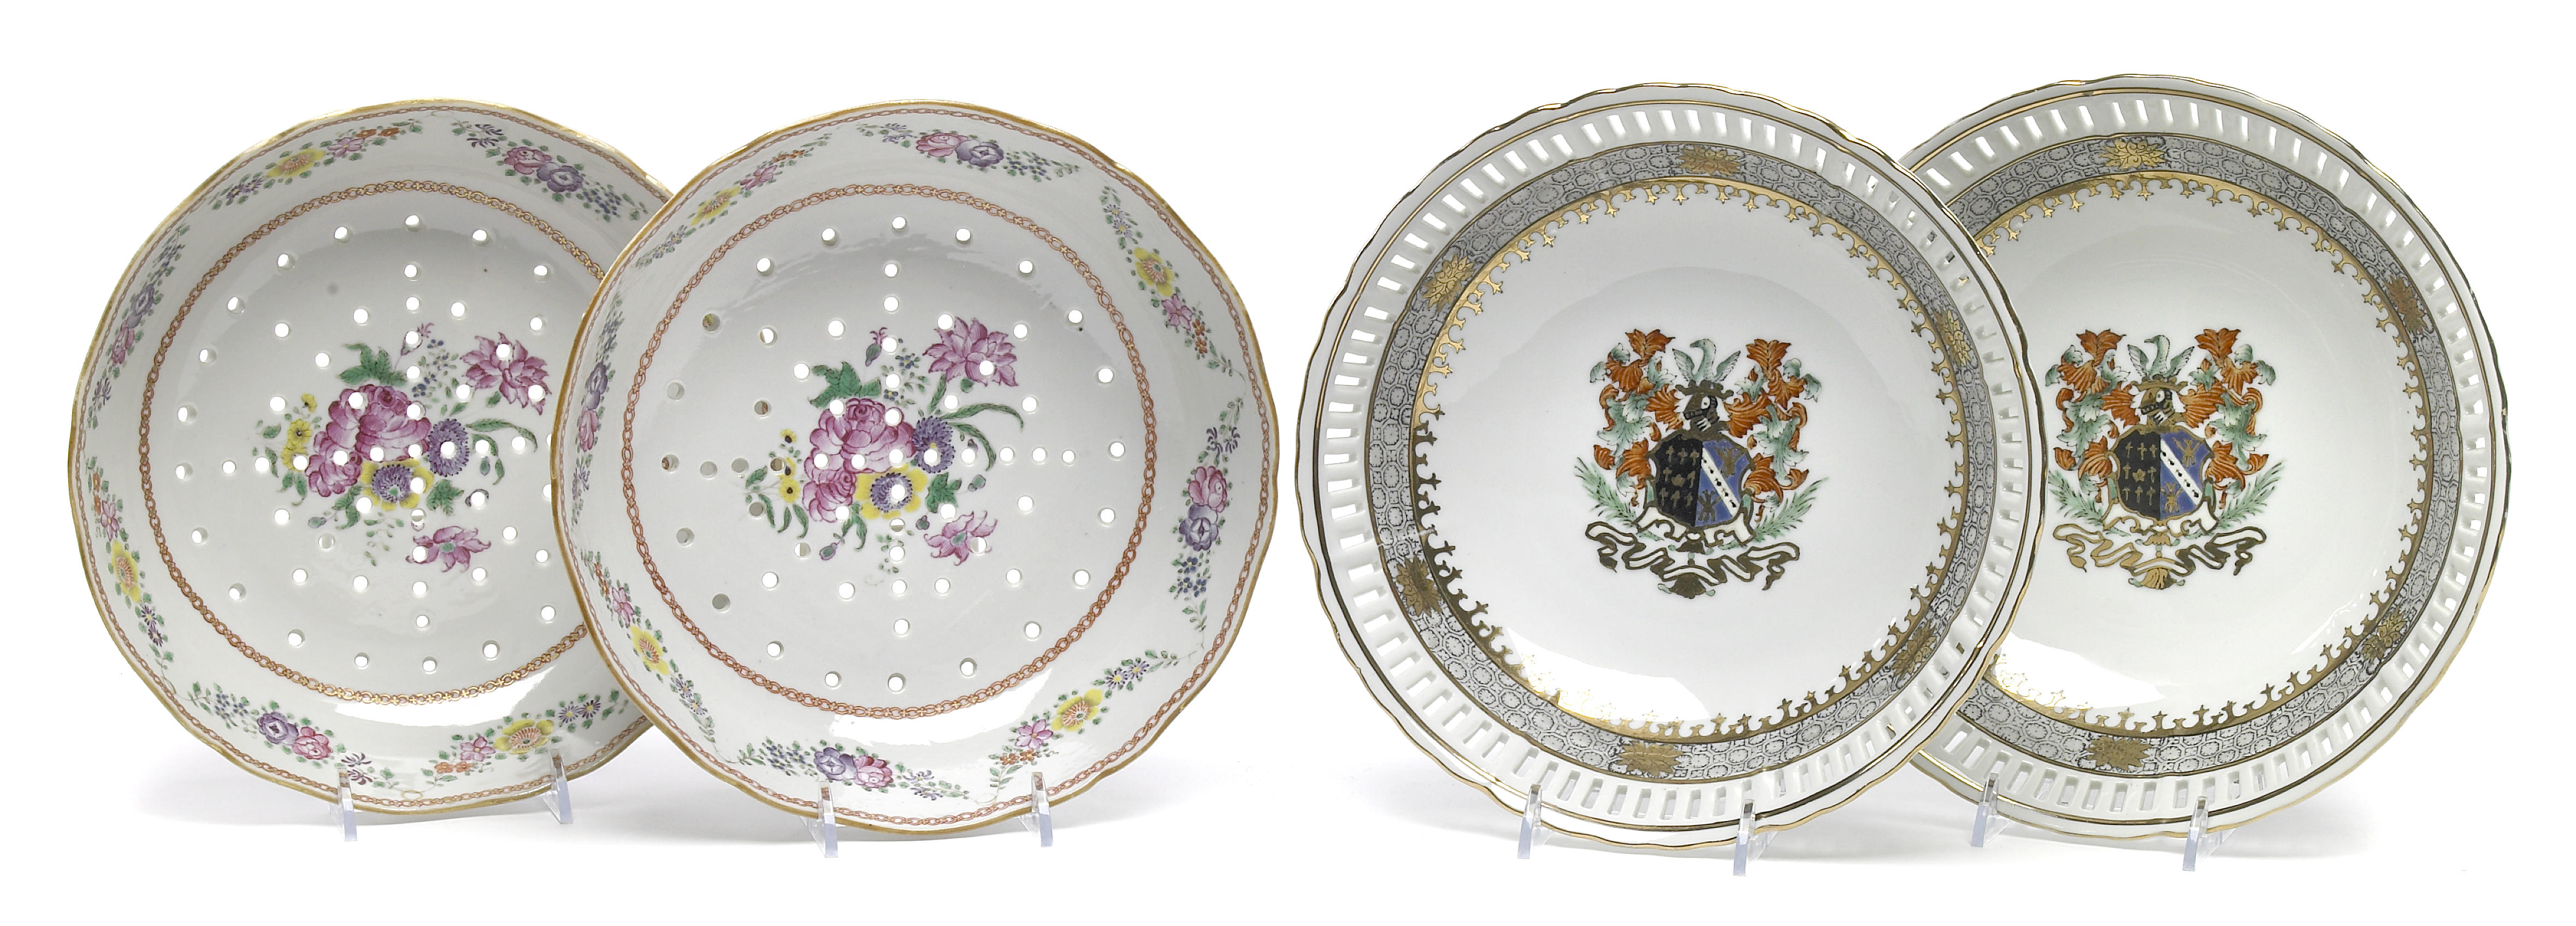 A pair of Continental porcelain